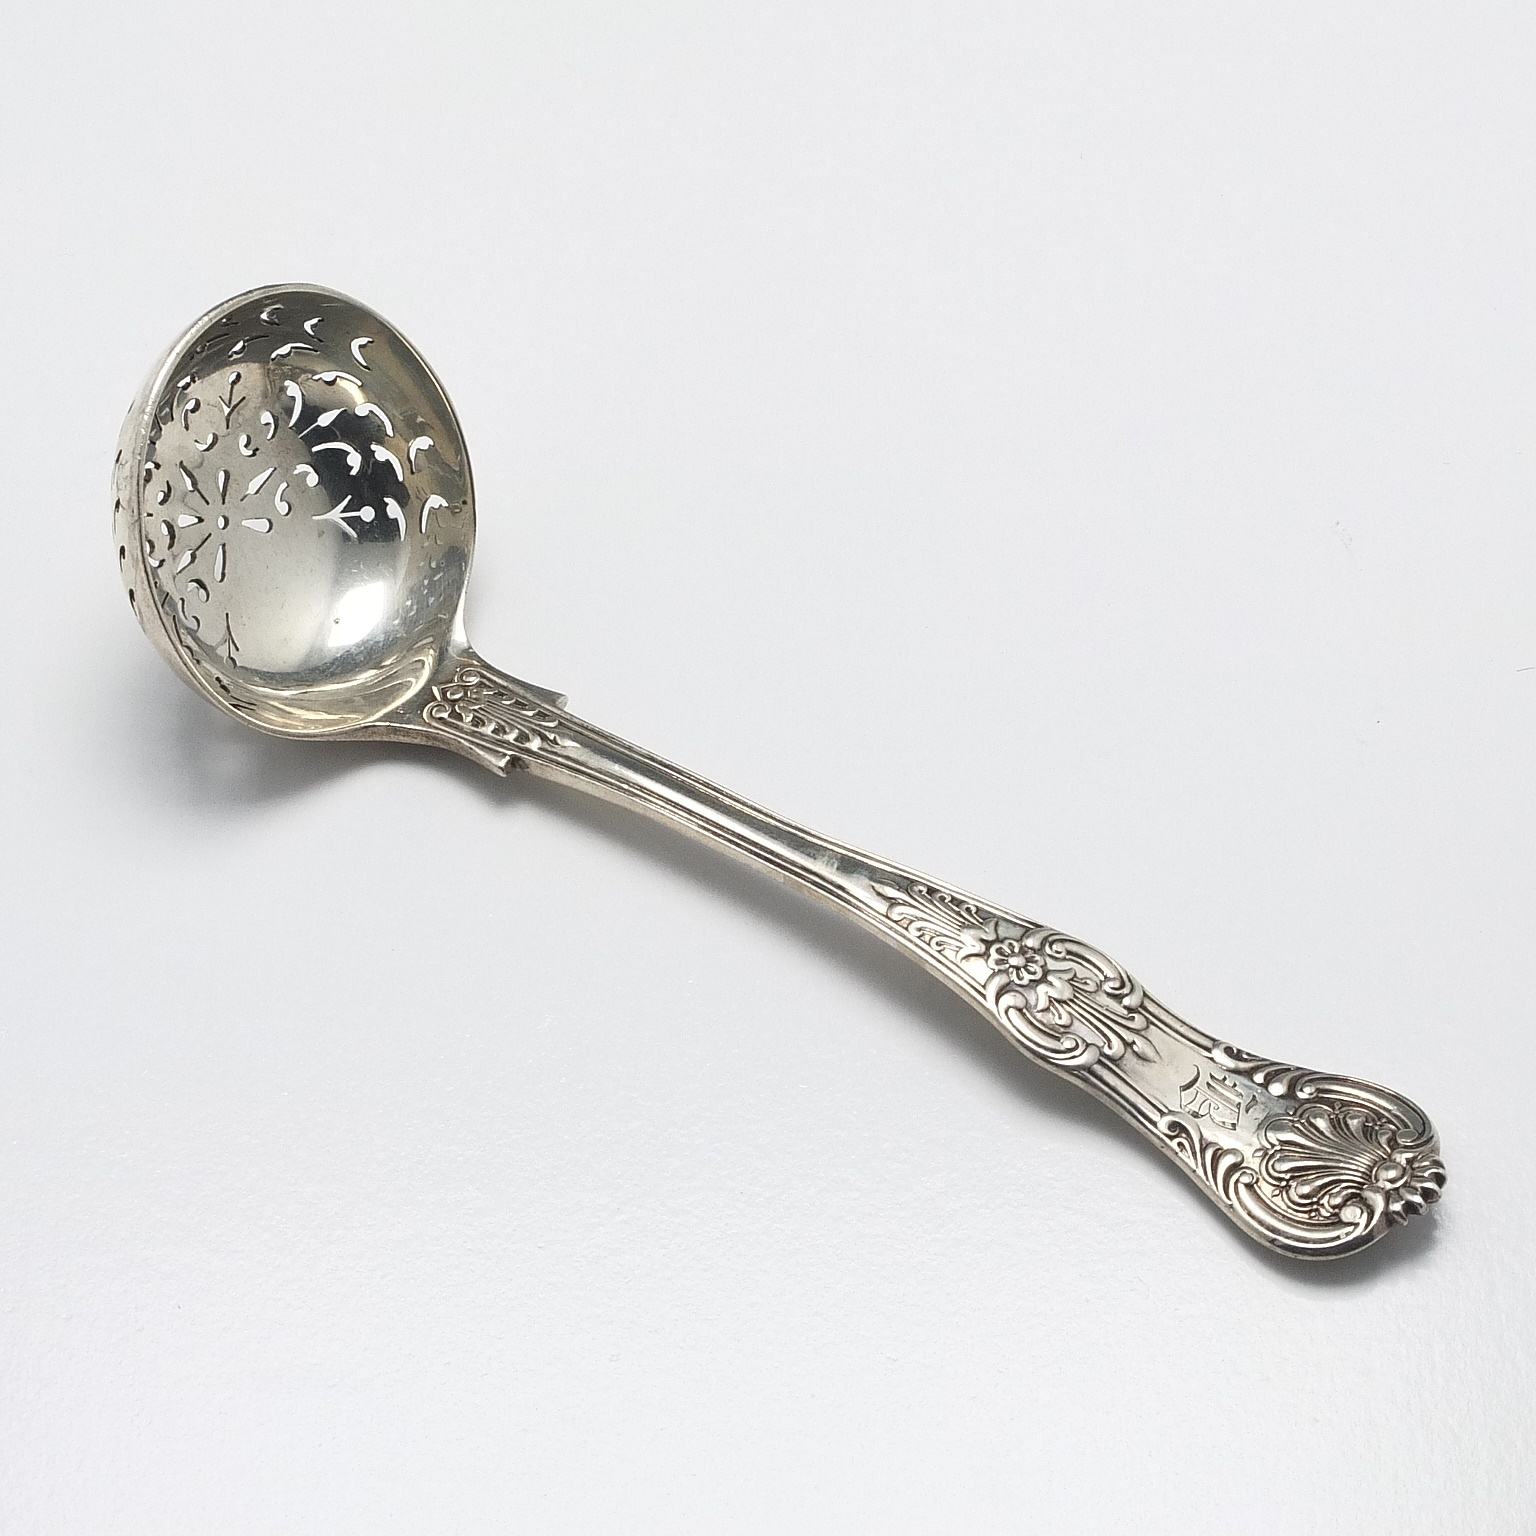 'Victorian Crested Sterling Silver Kings Pattern Sifting Spoon John Aldwinckle & Thomas Slater London 1888'